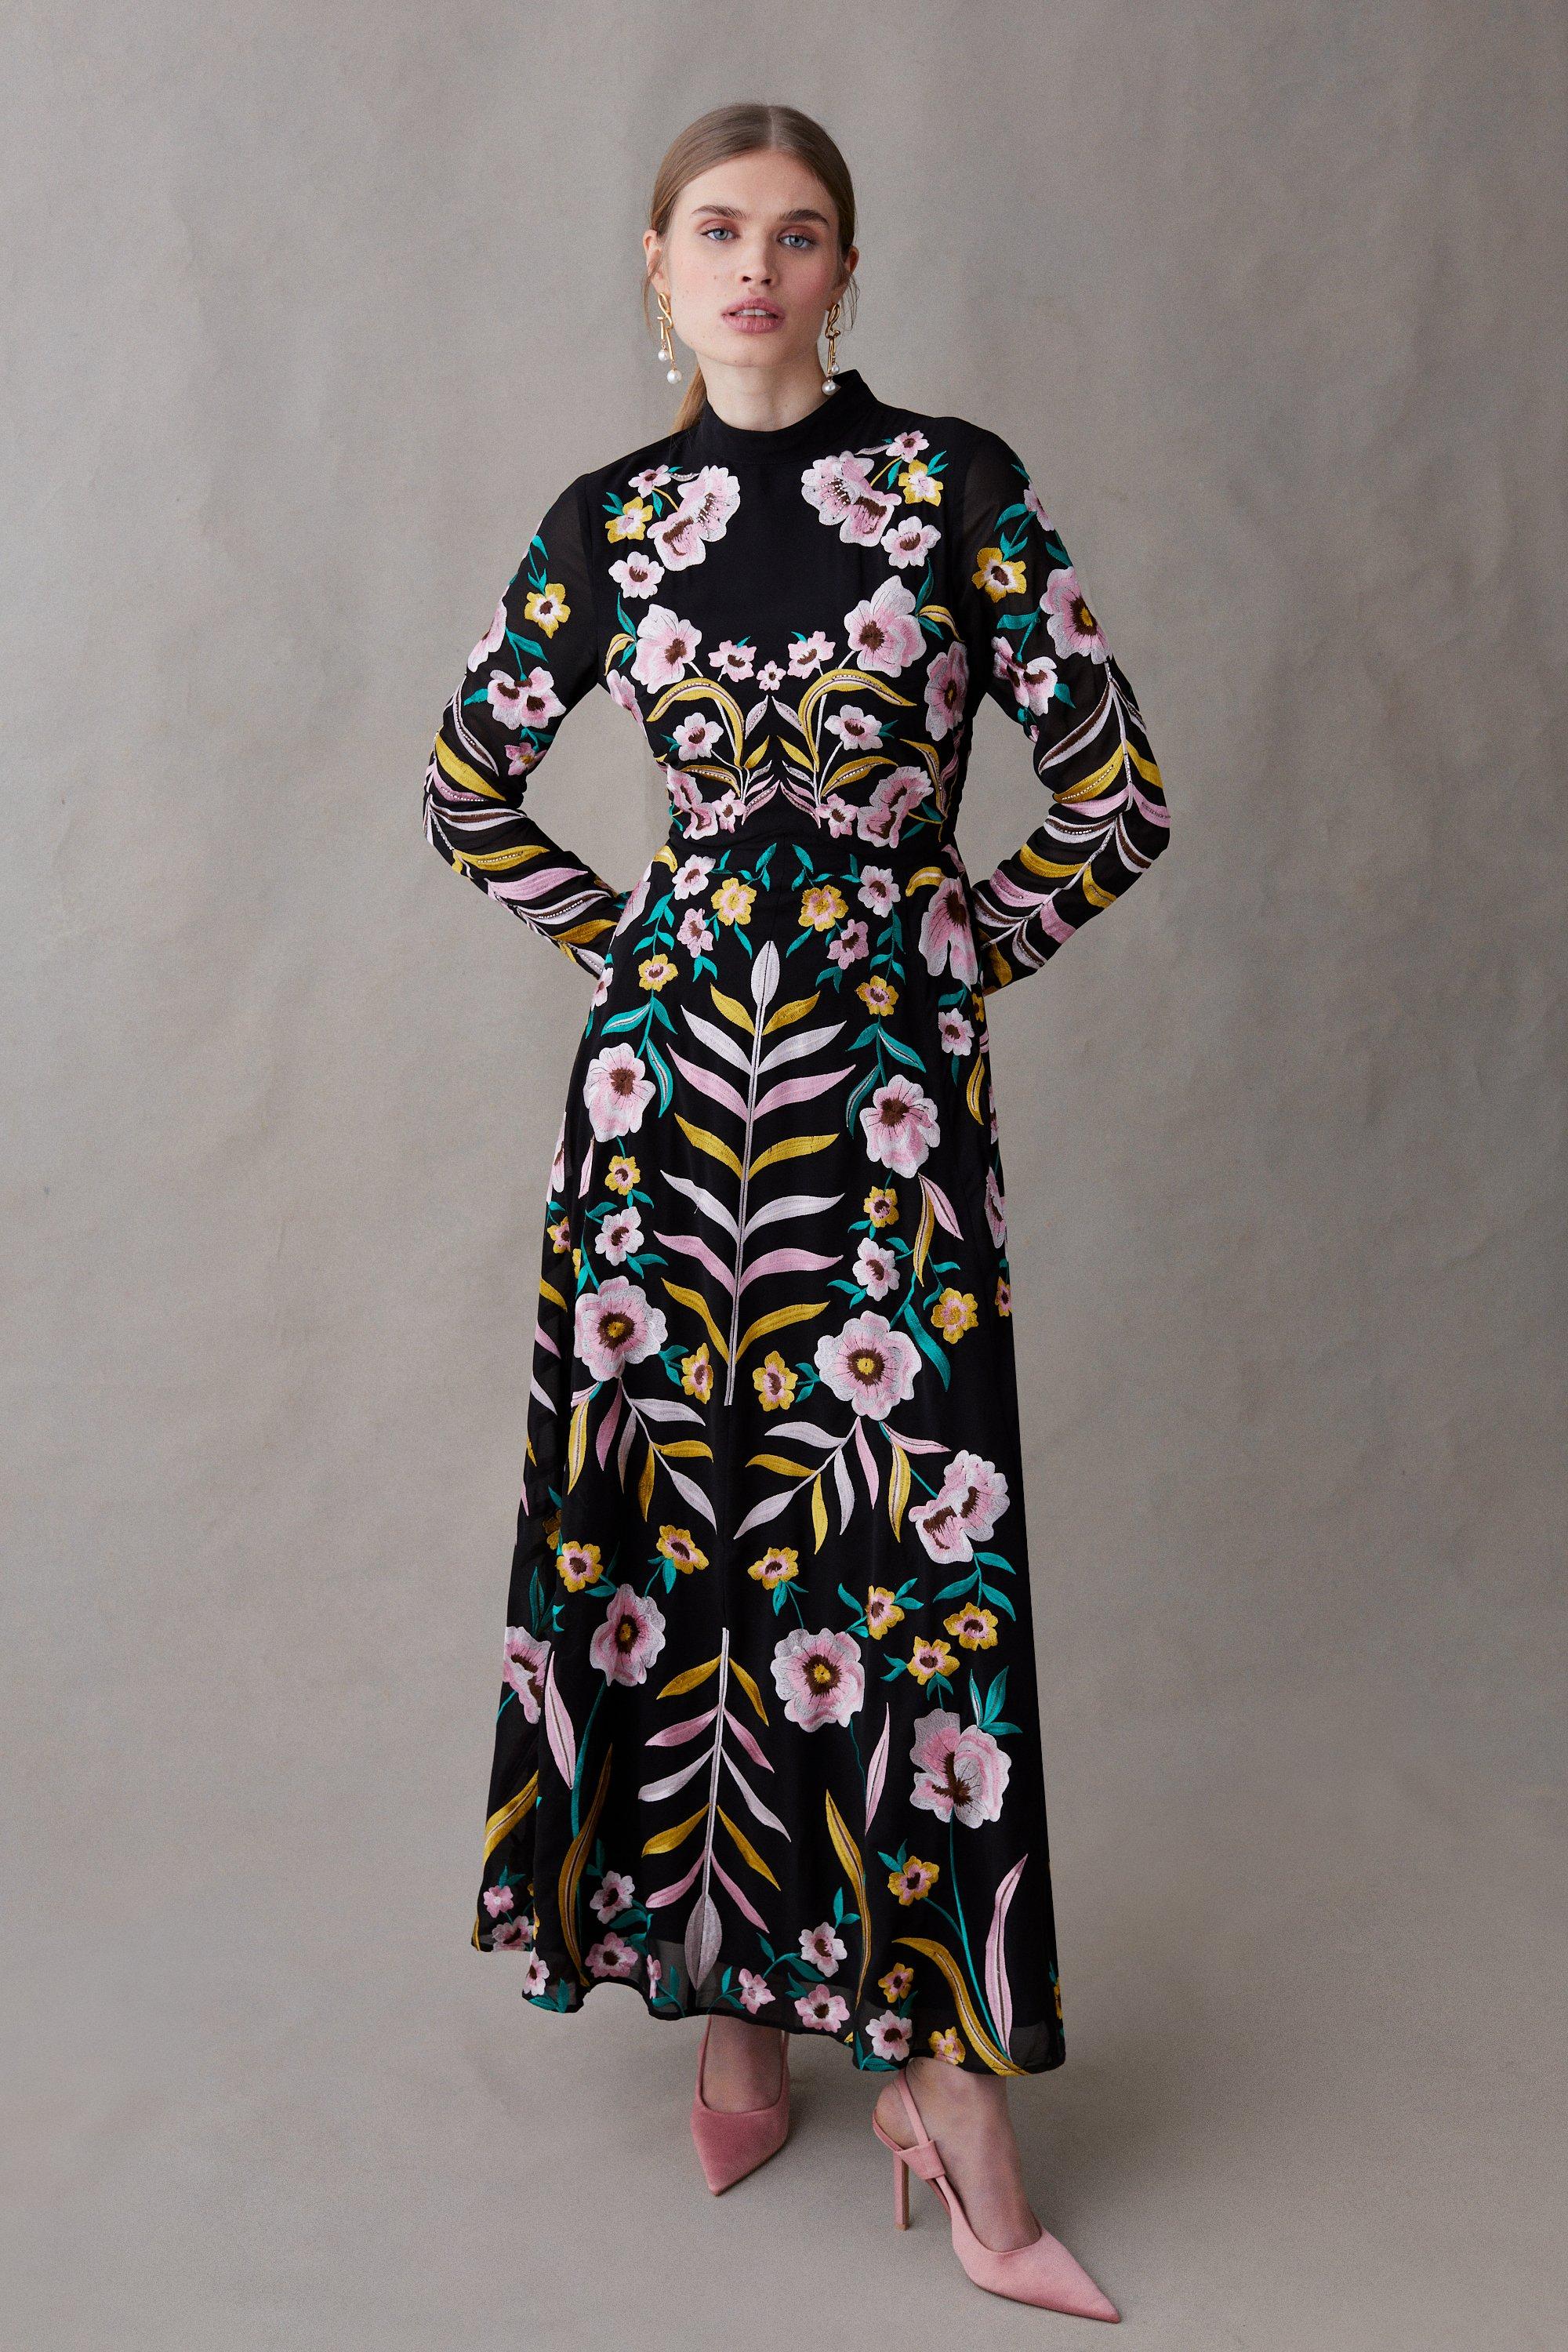 Statement Mirrored Floral Embroidered Maxi Dress